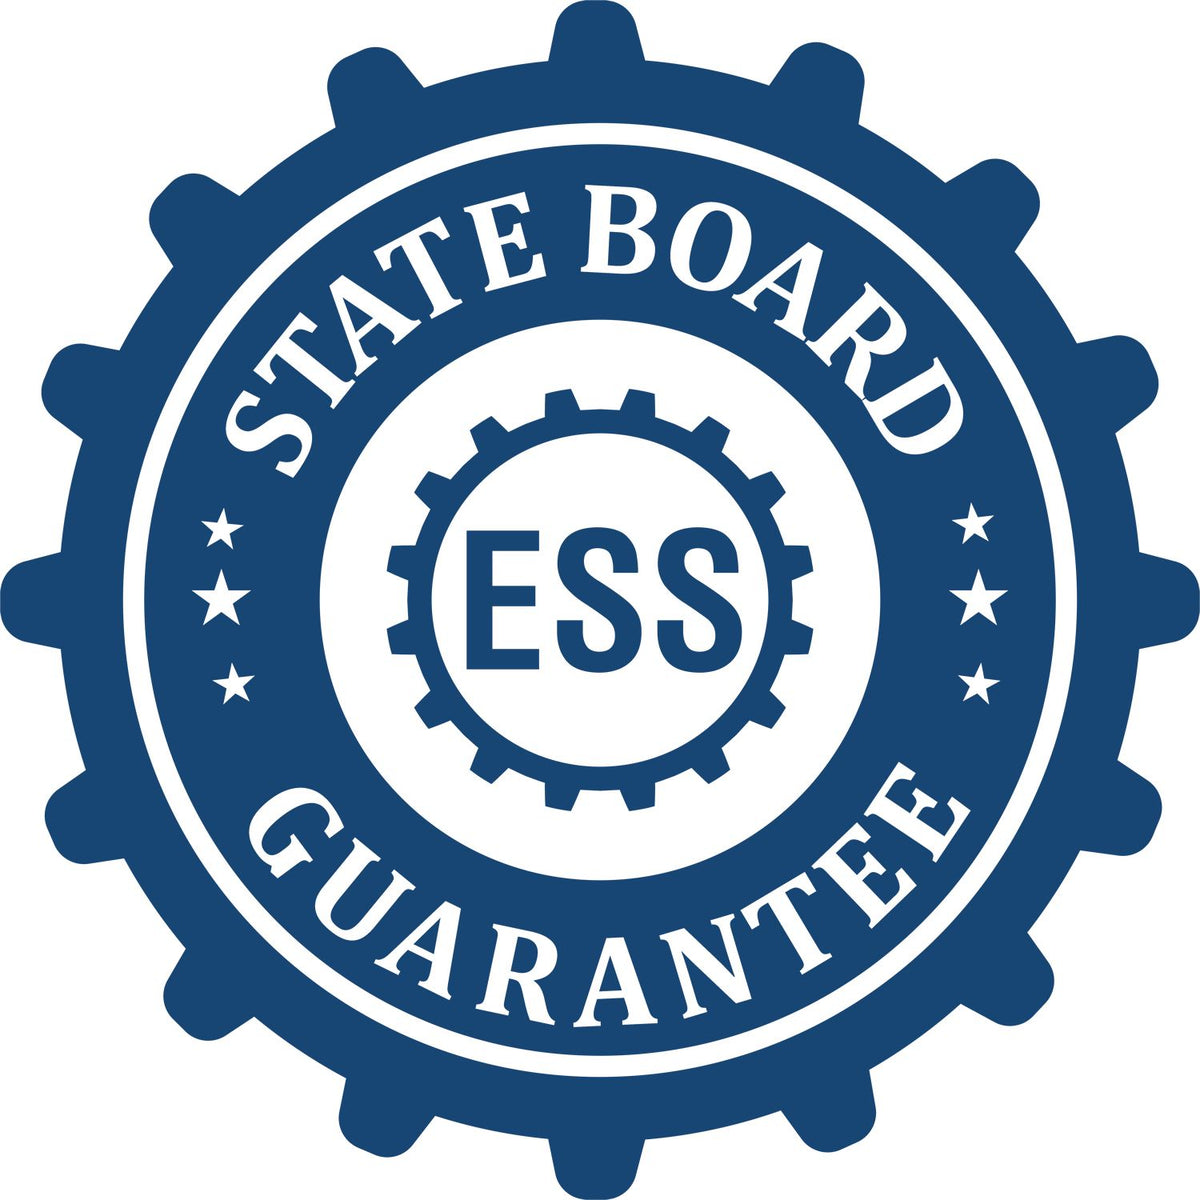 An emblem in a gear shape illustrating a state board guarantee for the Digital Pennsylvania PE Stamp and Electronic Seal for Pennsylvania Engineer product.